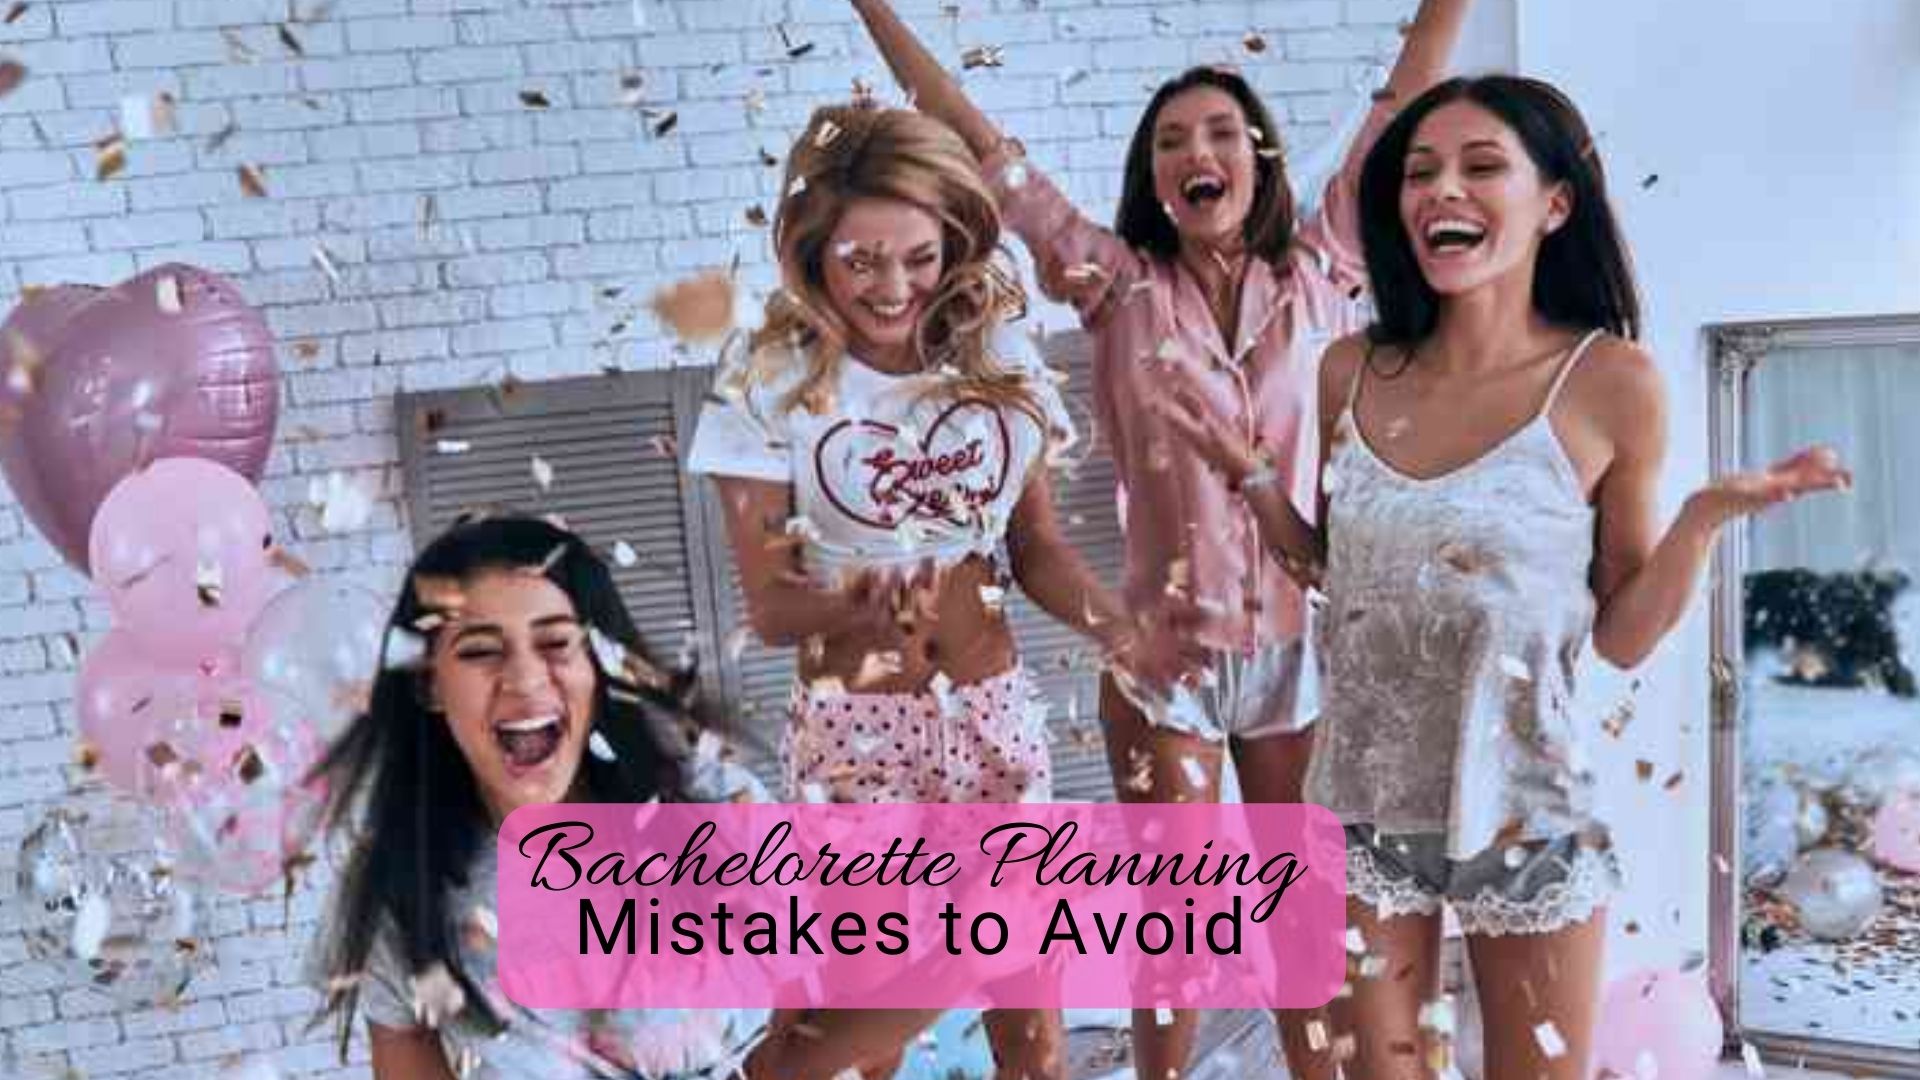 Bachelorette Planning Mistakes to Avoid